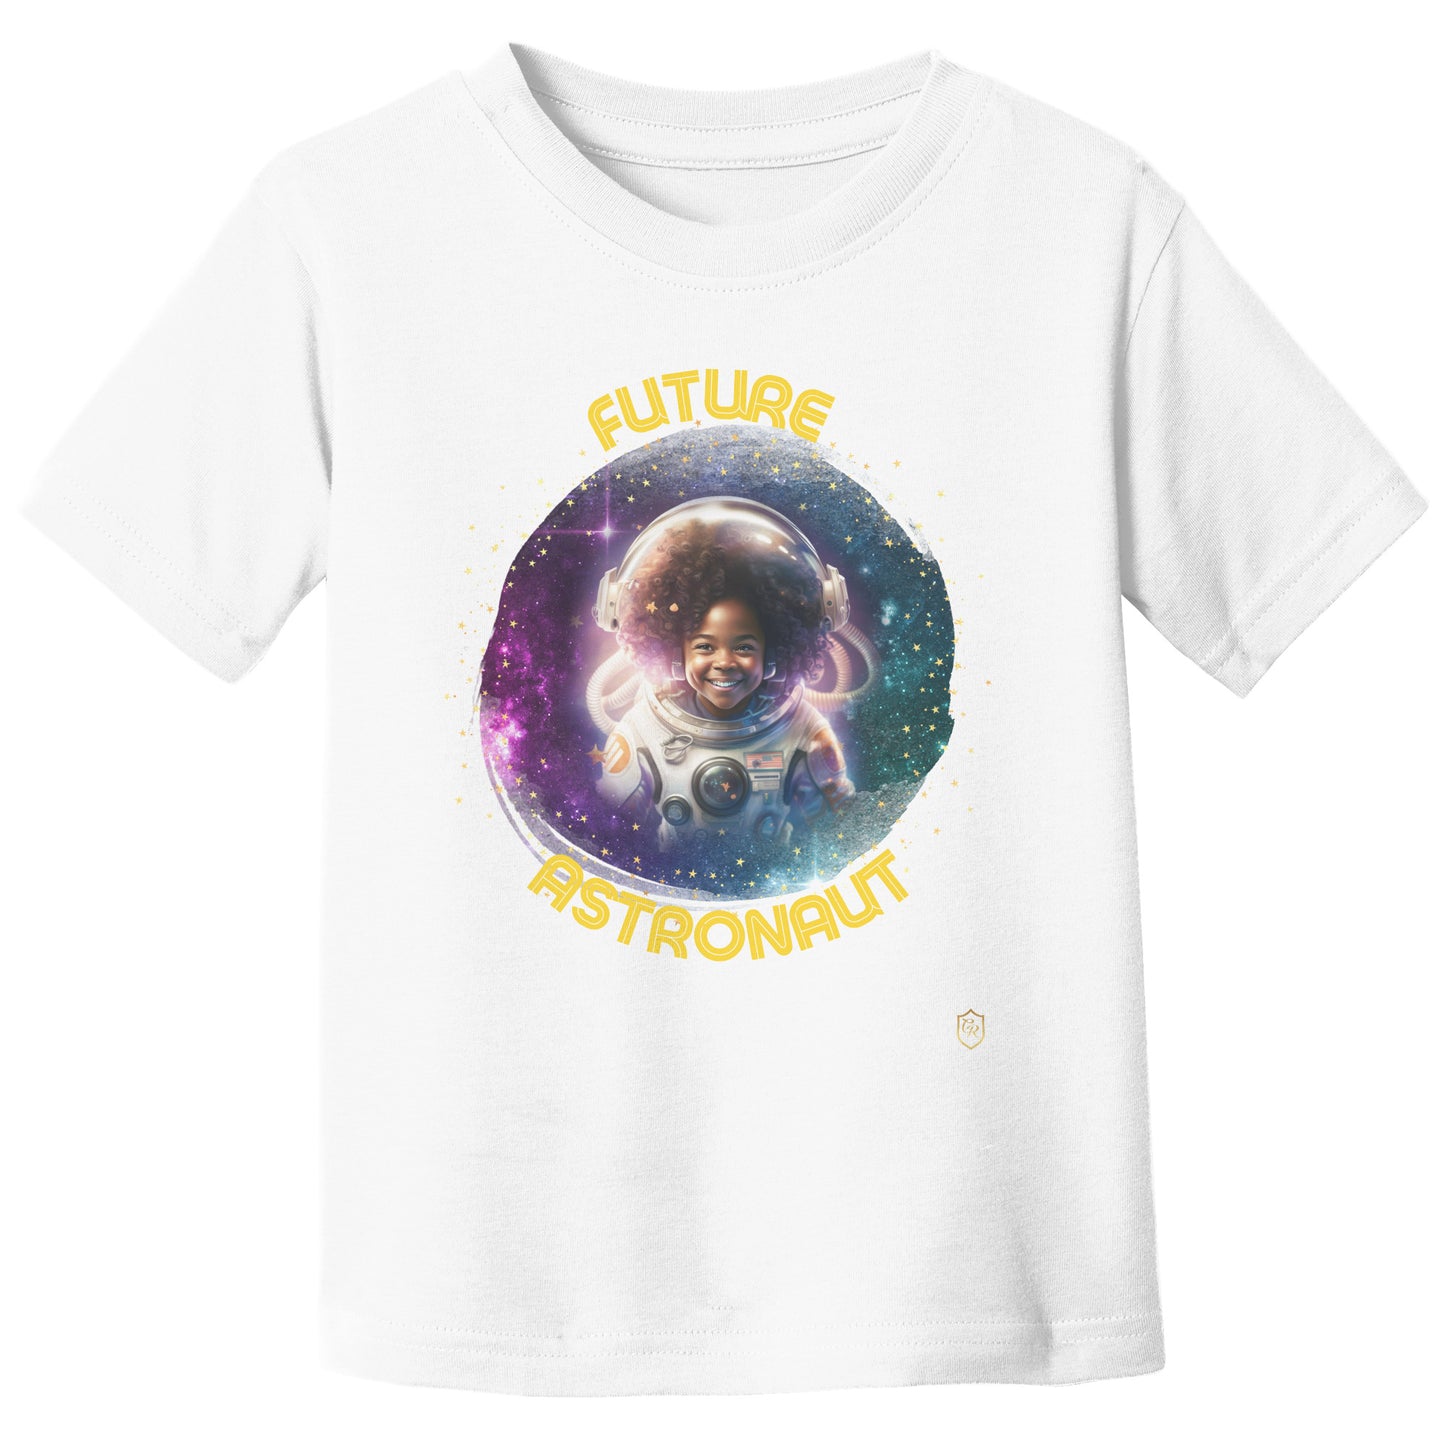 Girl's Galactic Explorer T-shirt: The Official Astronaut Gear of the Future